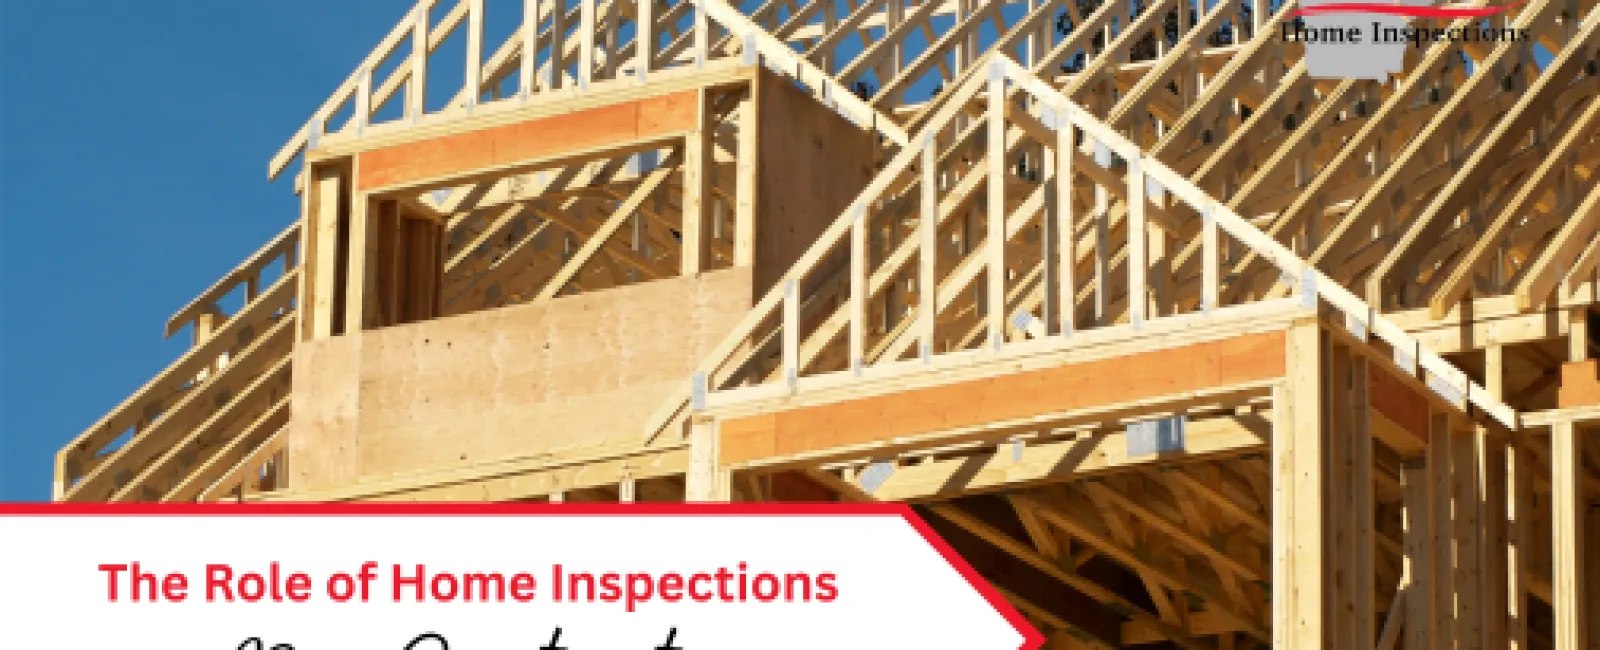 The Role of Home Inspections in New Construction